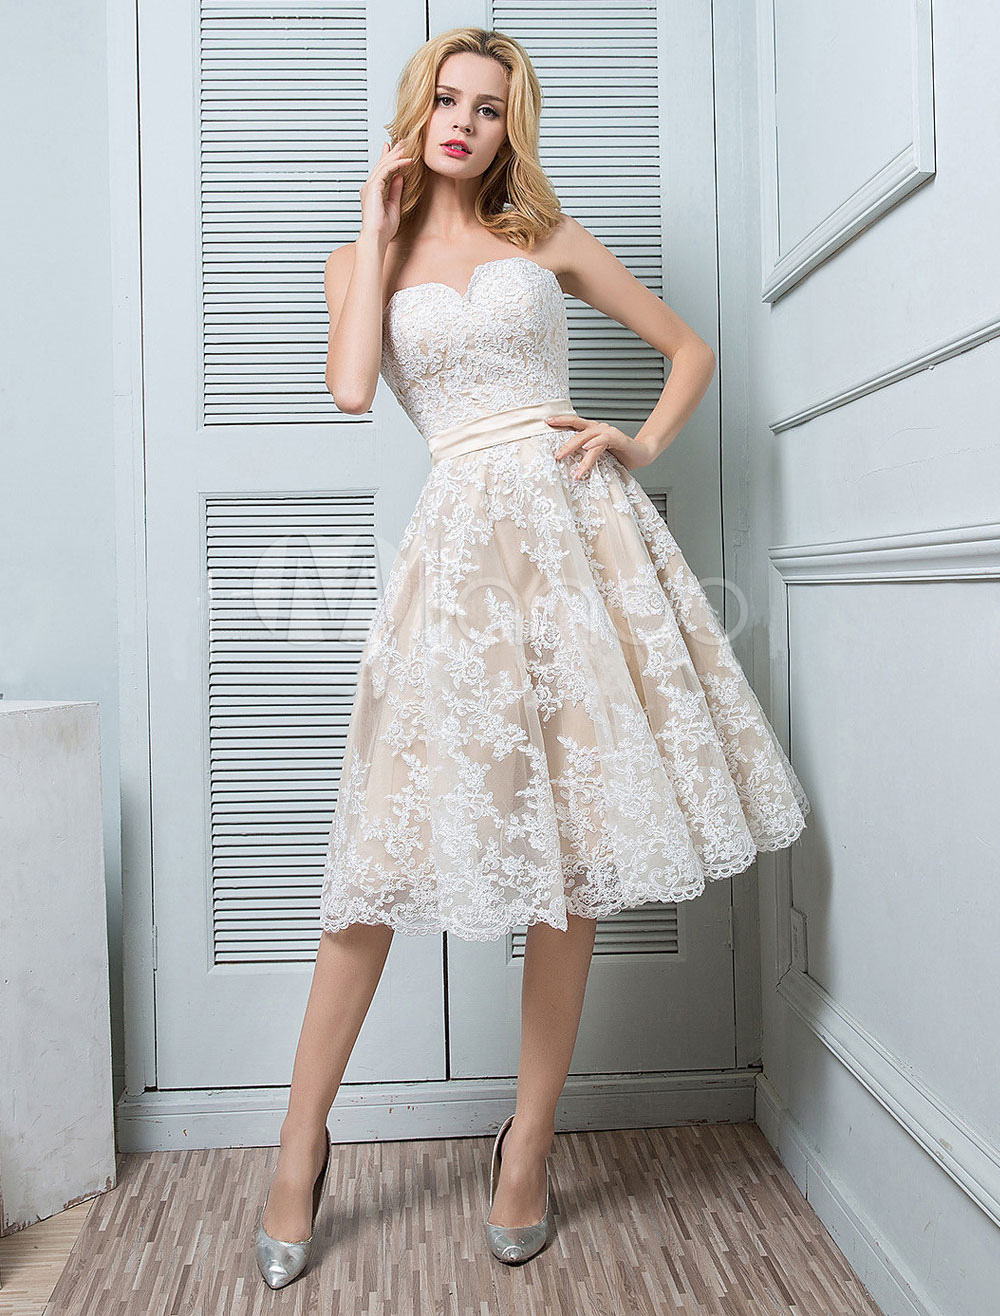 White Lace Dress Strapless Party Dress Embroidered Midi Dress - Milanoo.com